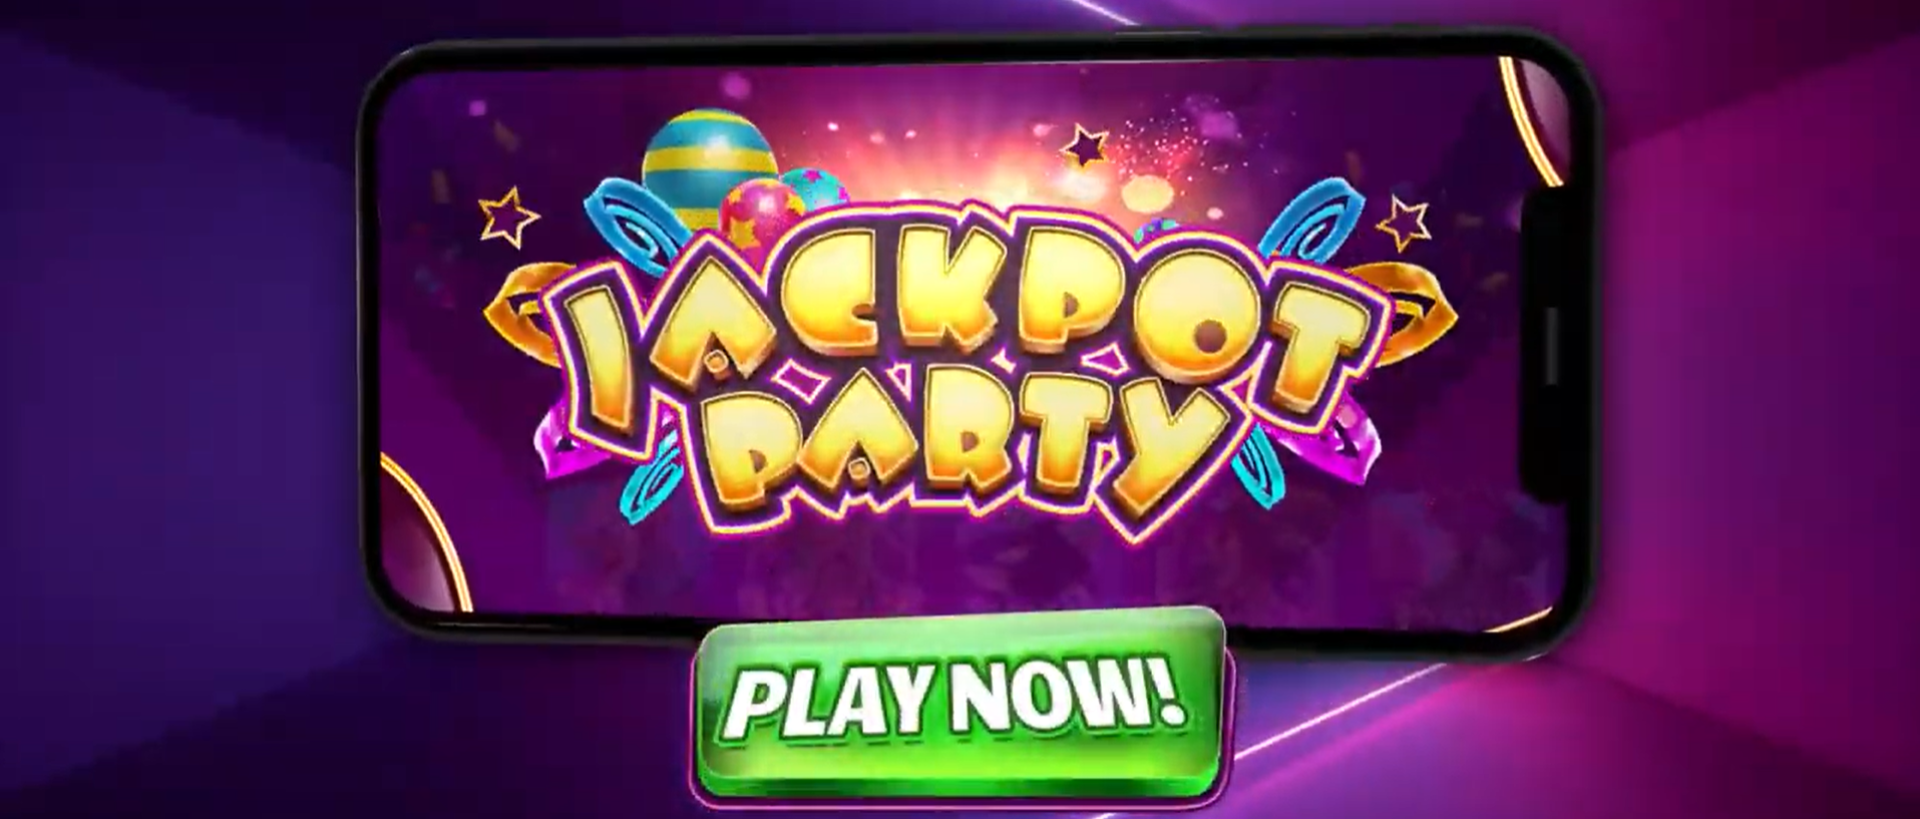 Exploit The Favourable Casino Payout Rate At Fair Go Casino Slot Machine